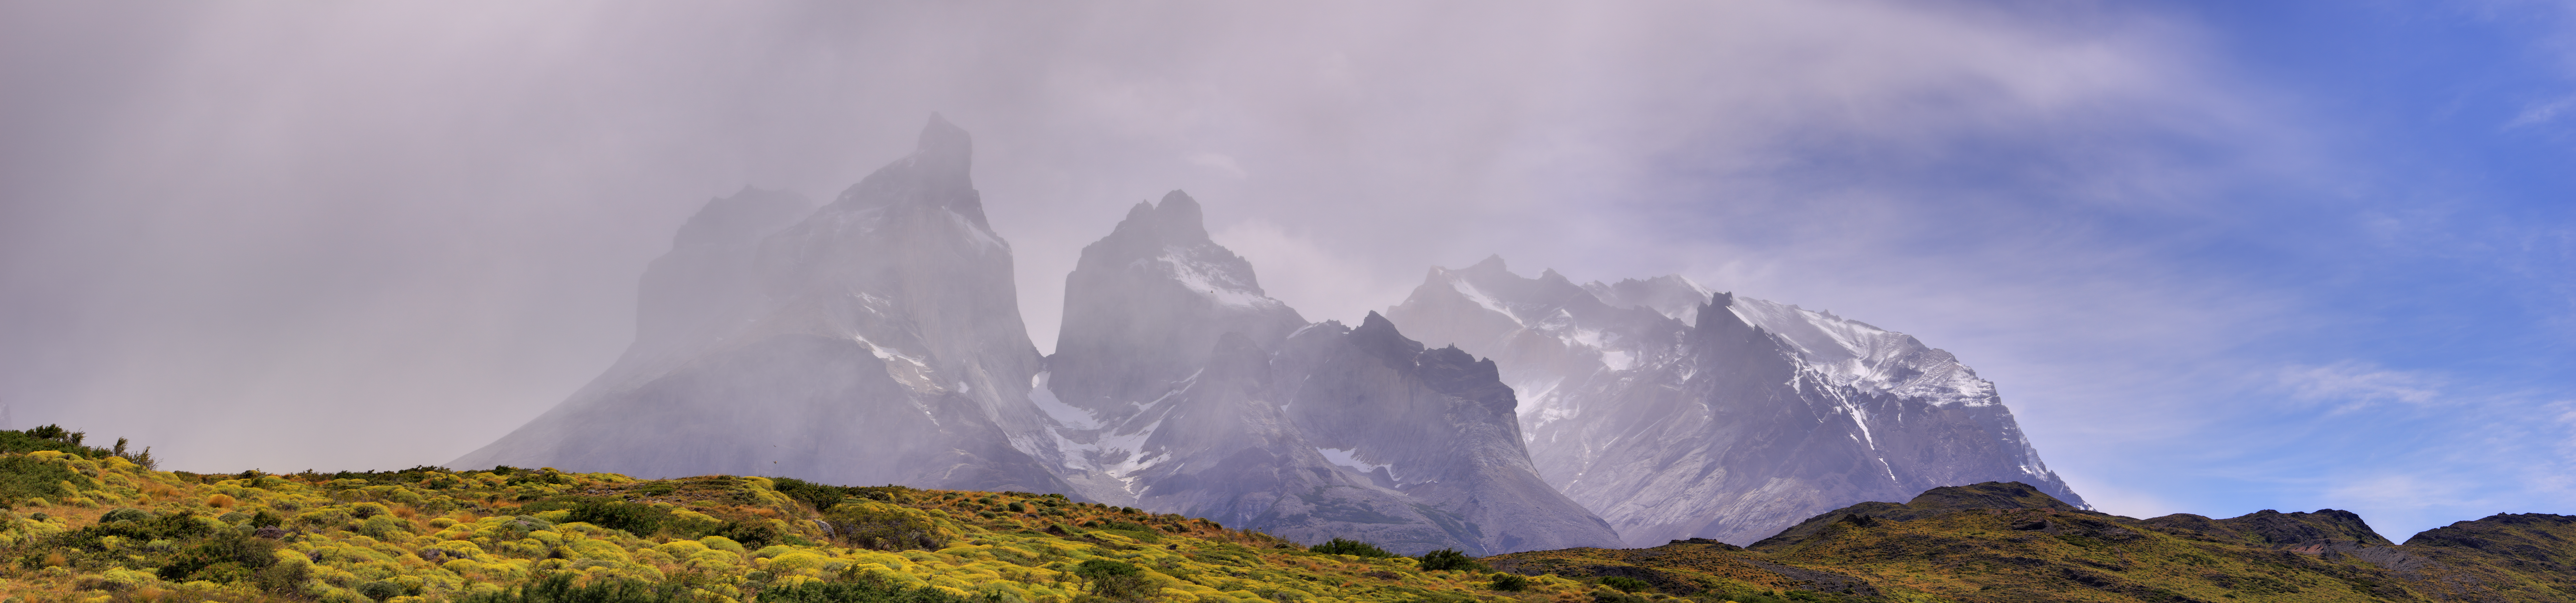 Torres Del Paine svg #1, Download drawings